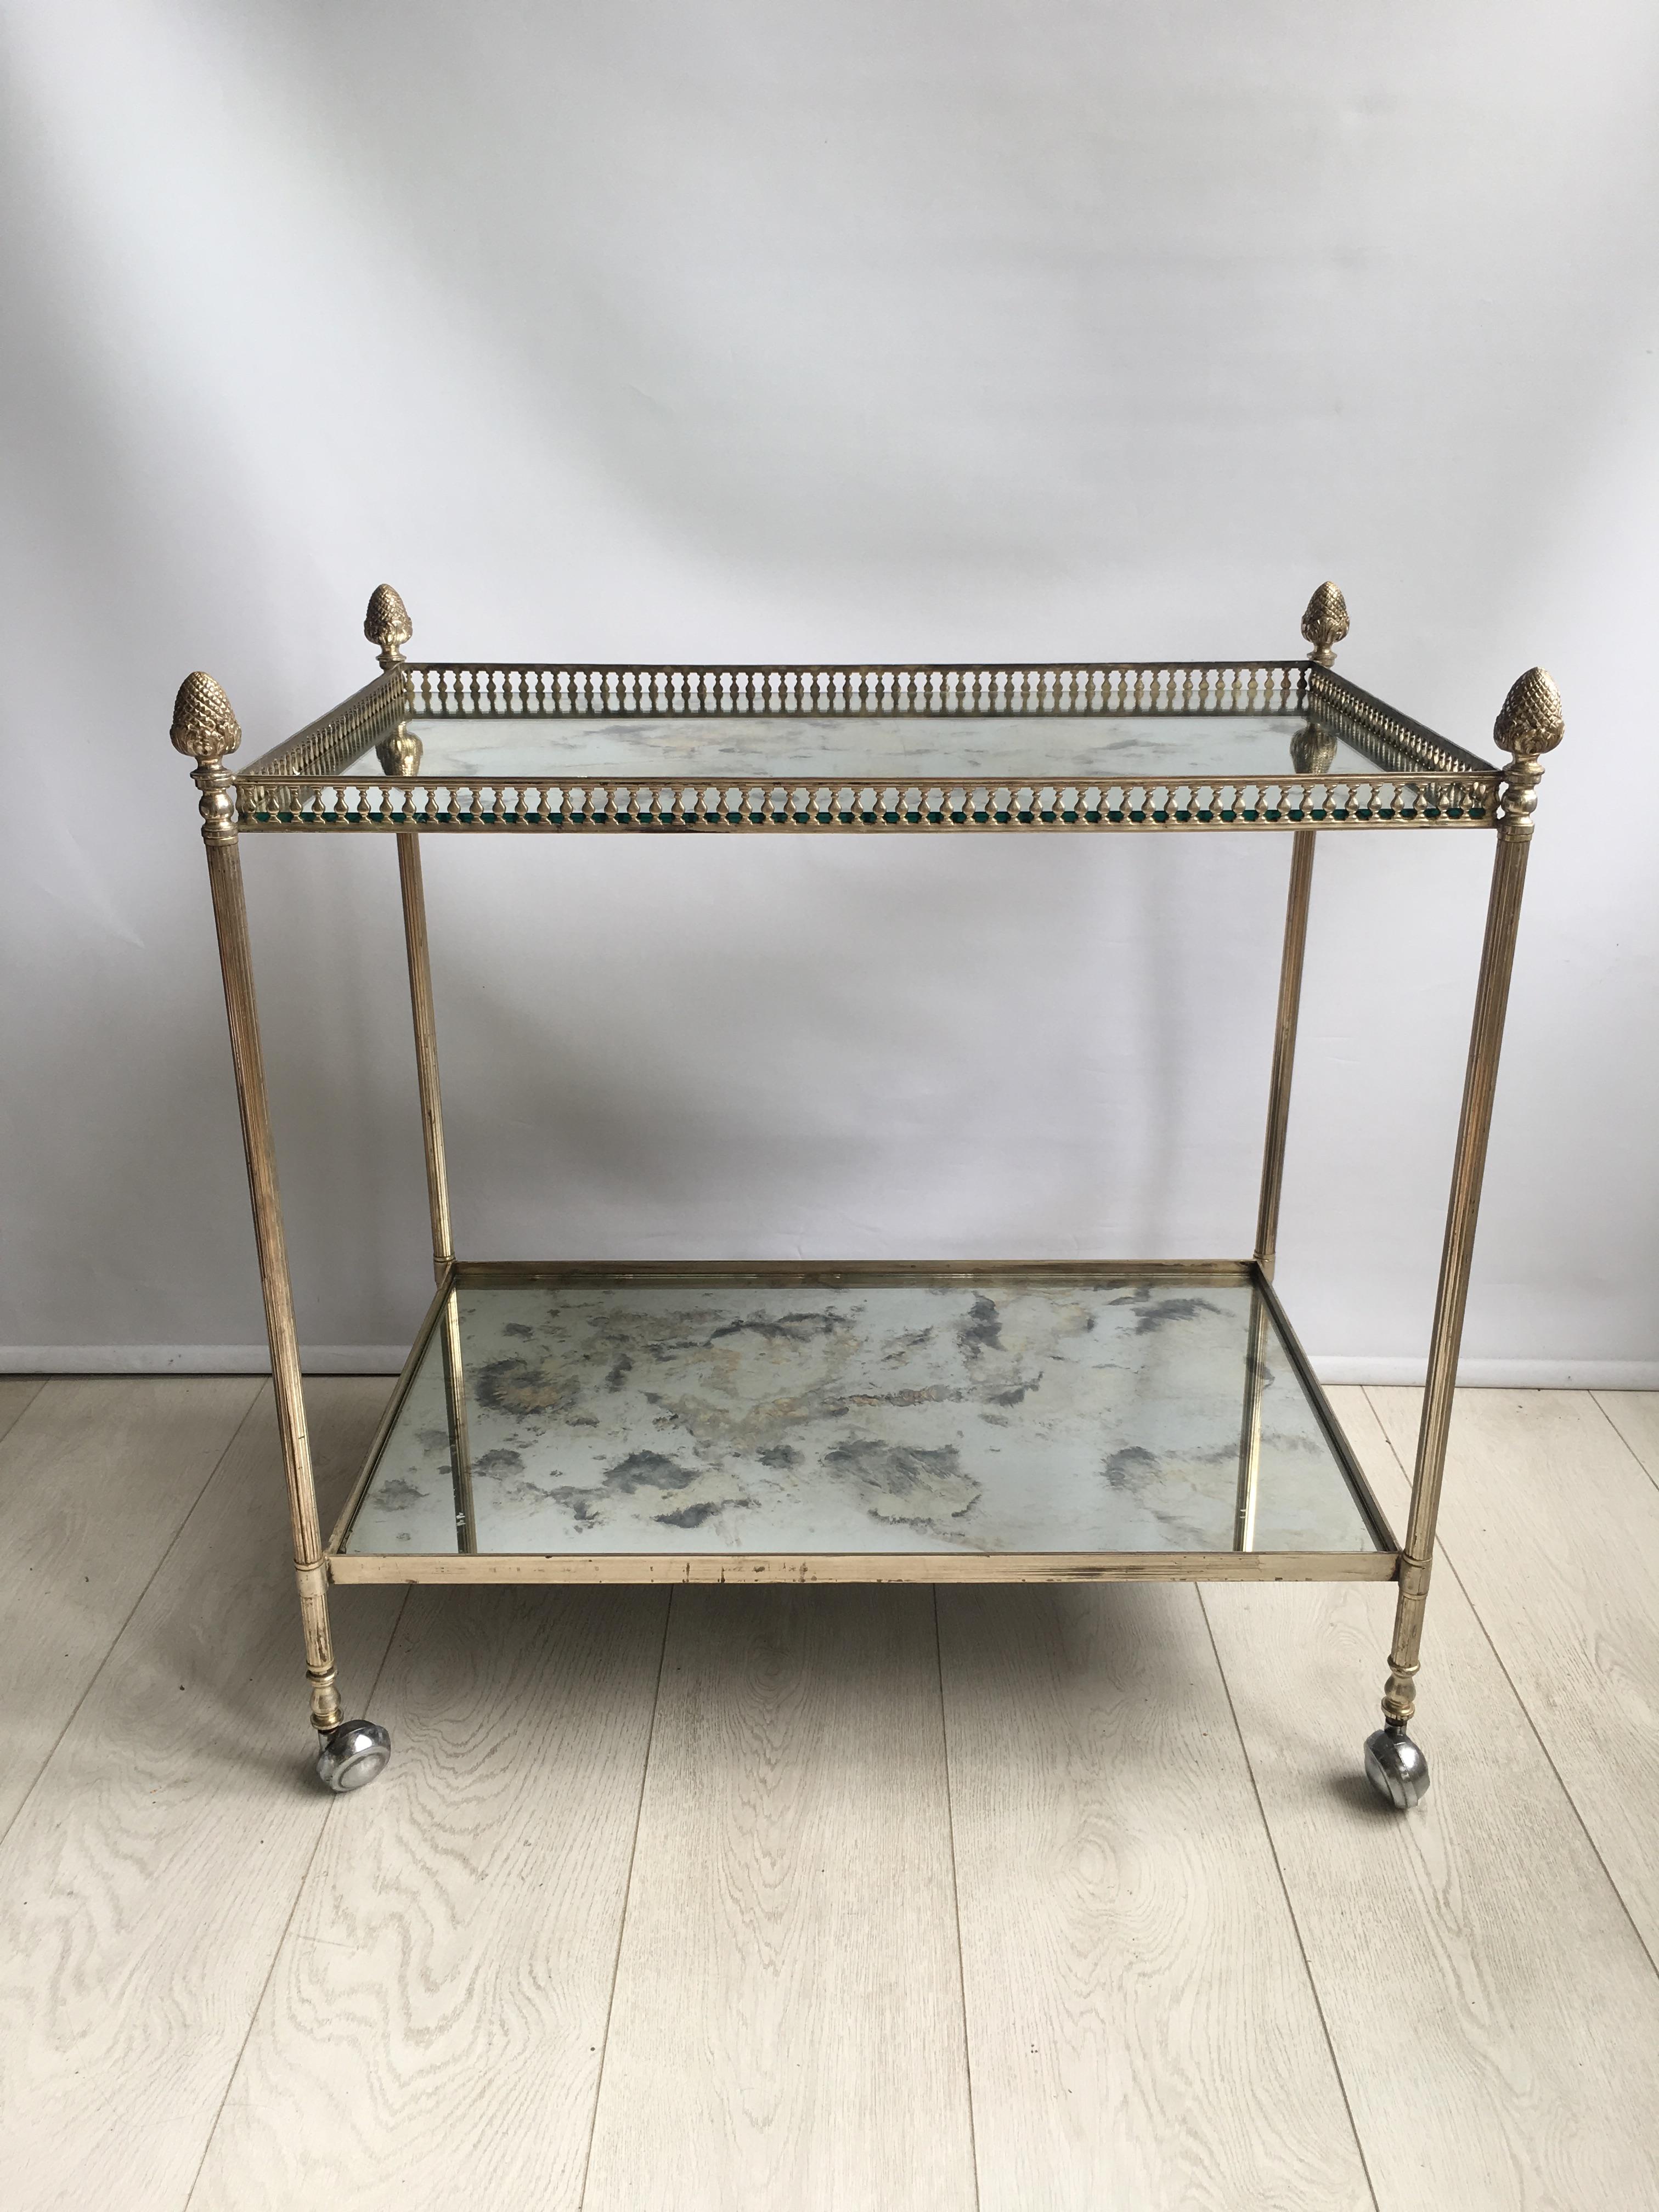 Classic vintage drinks trolley from France, circa 1960

Nickel/silver in color with decorative finials. 

Mirrored glass shelves with a few nibbles to the corners (please see close up images)

One of the larger drinks